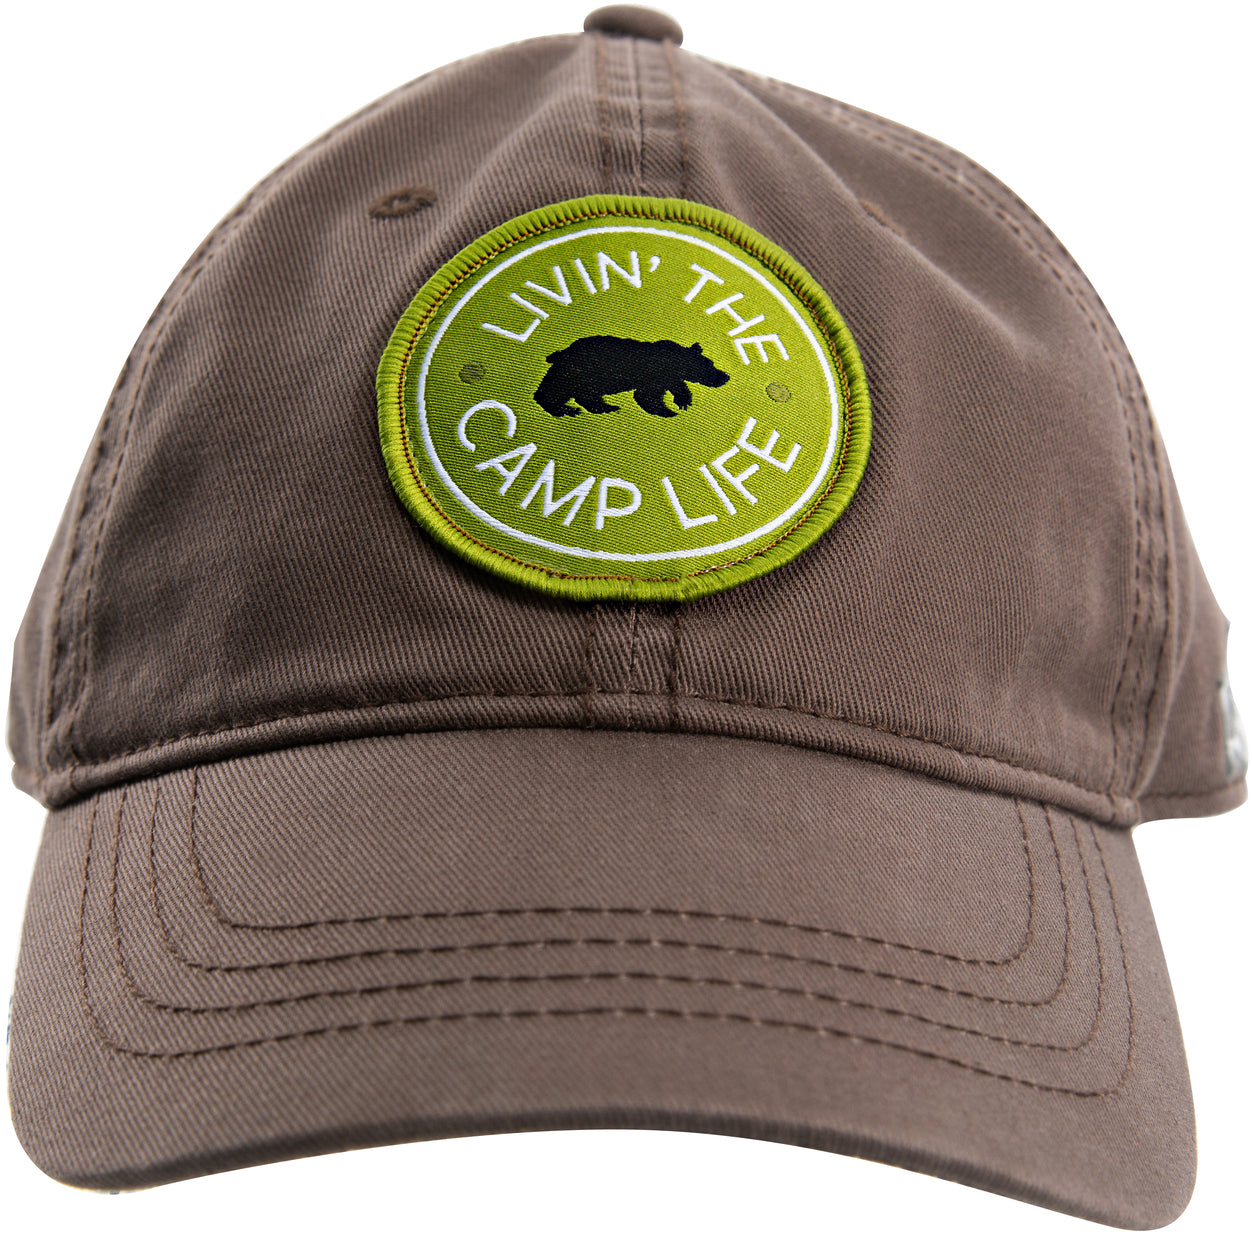 Camp Life - Cocoa Brown Adjustable Hat